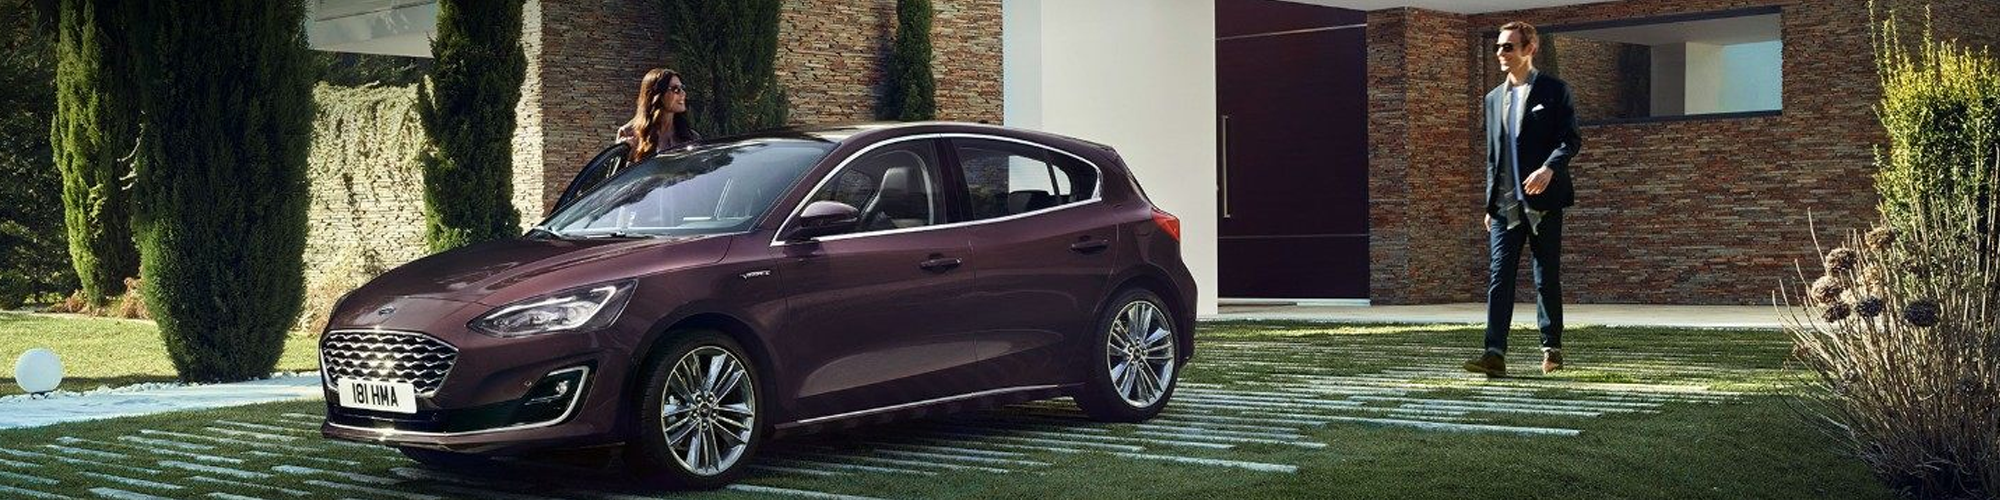 All New Ford Focus Vignale